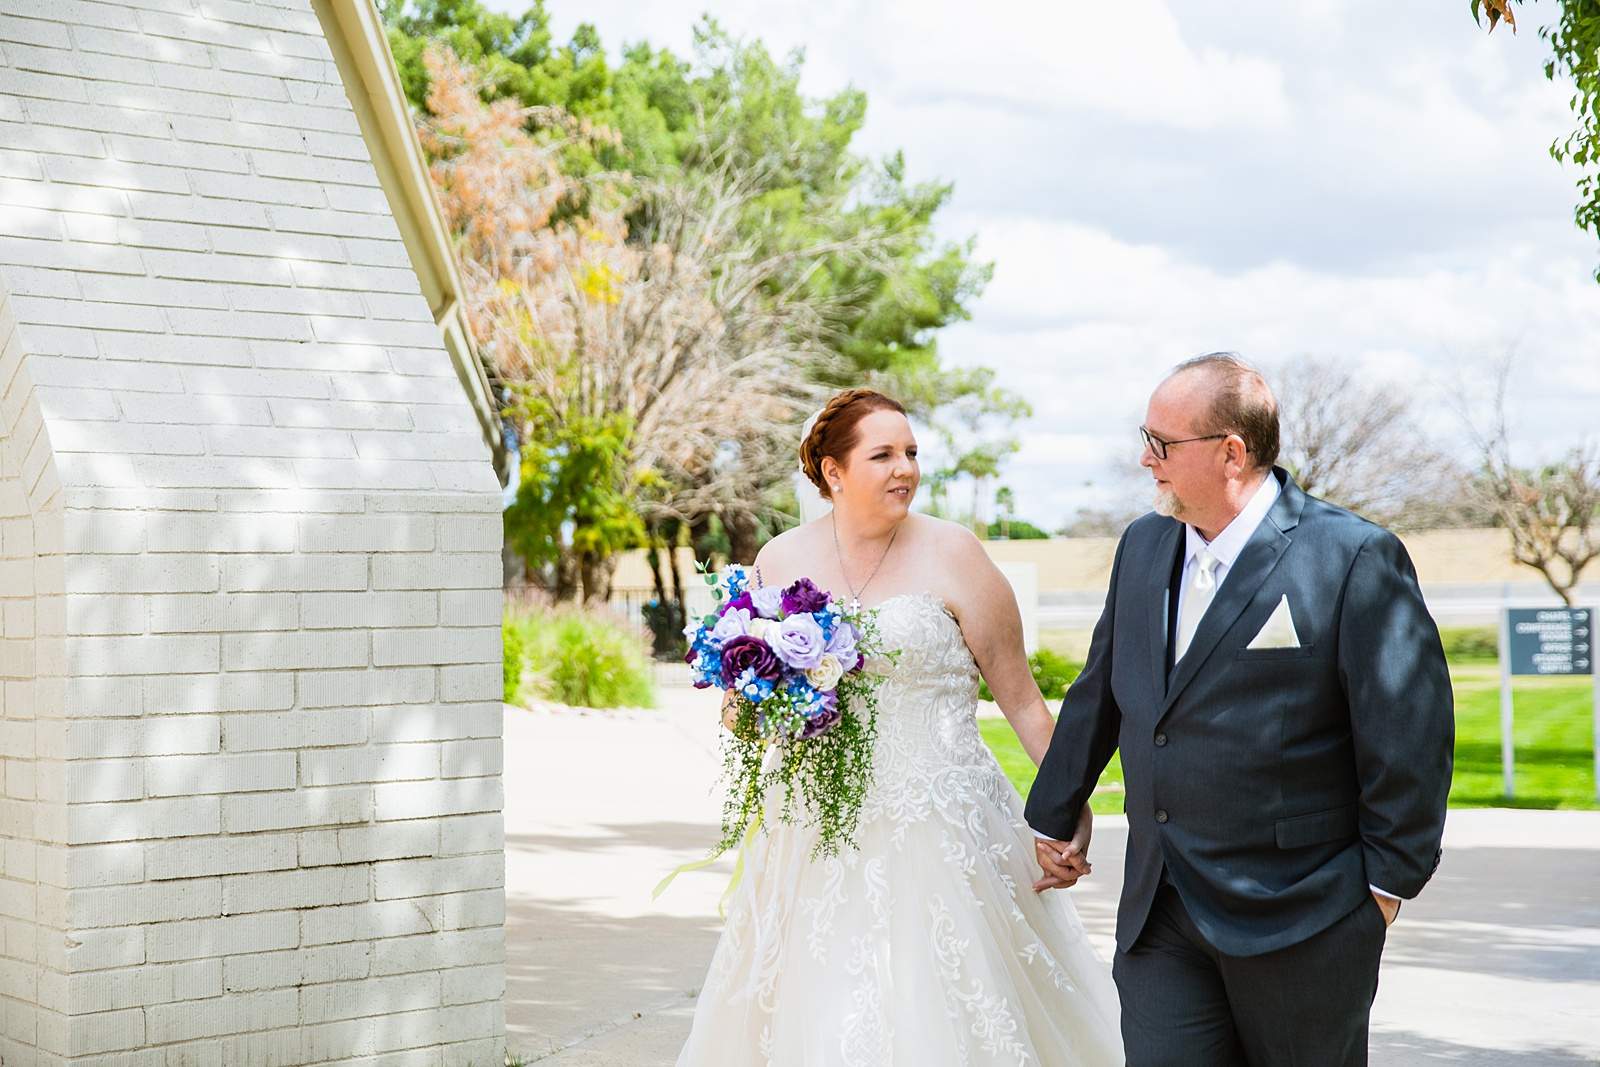 Bride and groom walking together during their Sun Valley Church wedding by Arizona wedding photographer PMA Photography.